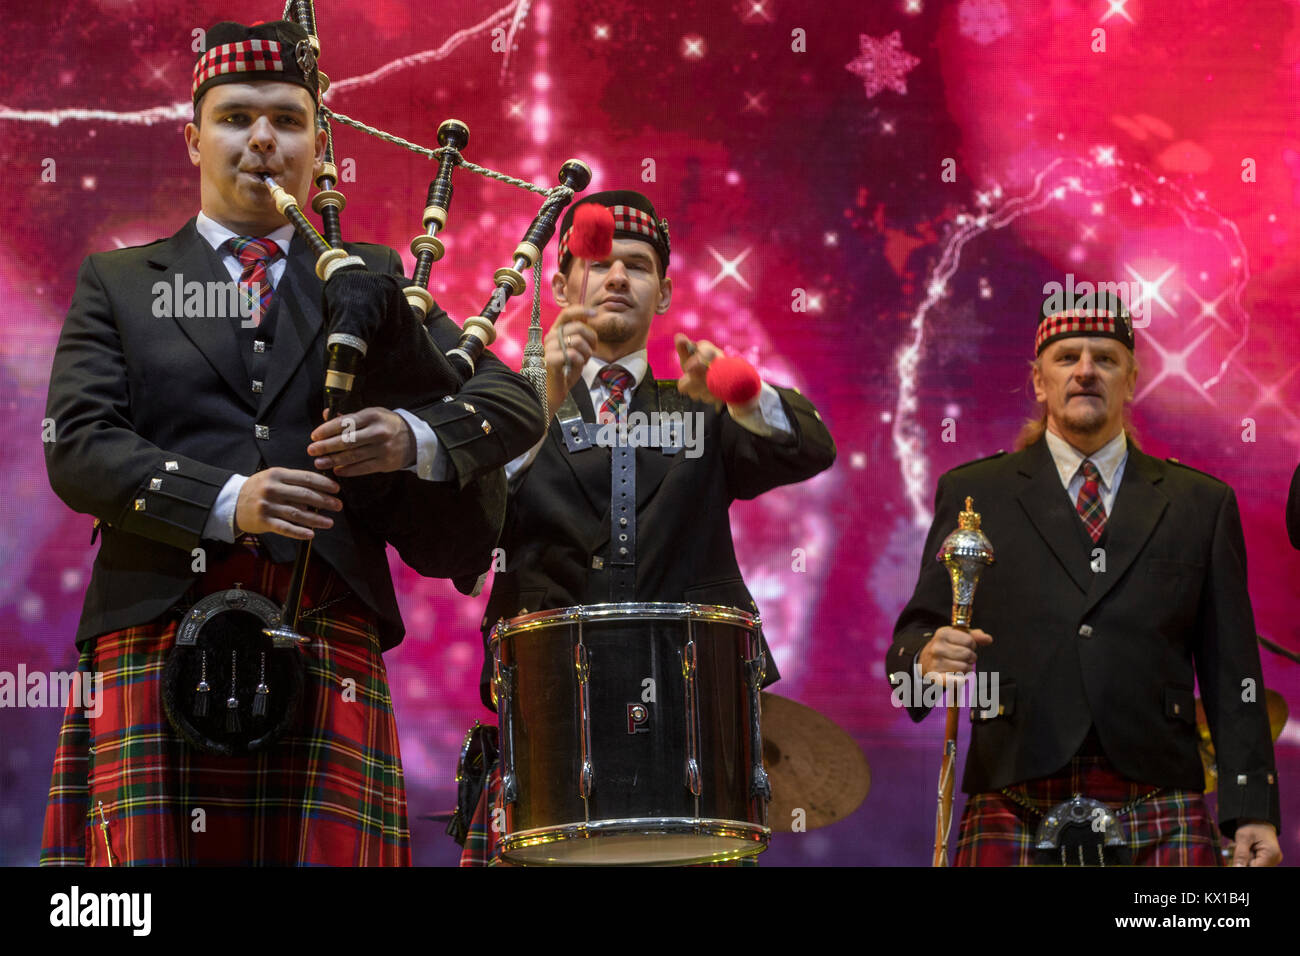 Scottish band performs on Tverskaya street in Moscow during the festival 'The Journey to Christmas' Stock Photo